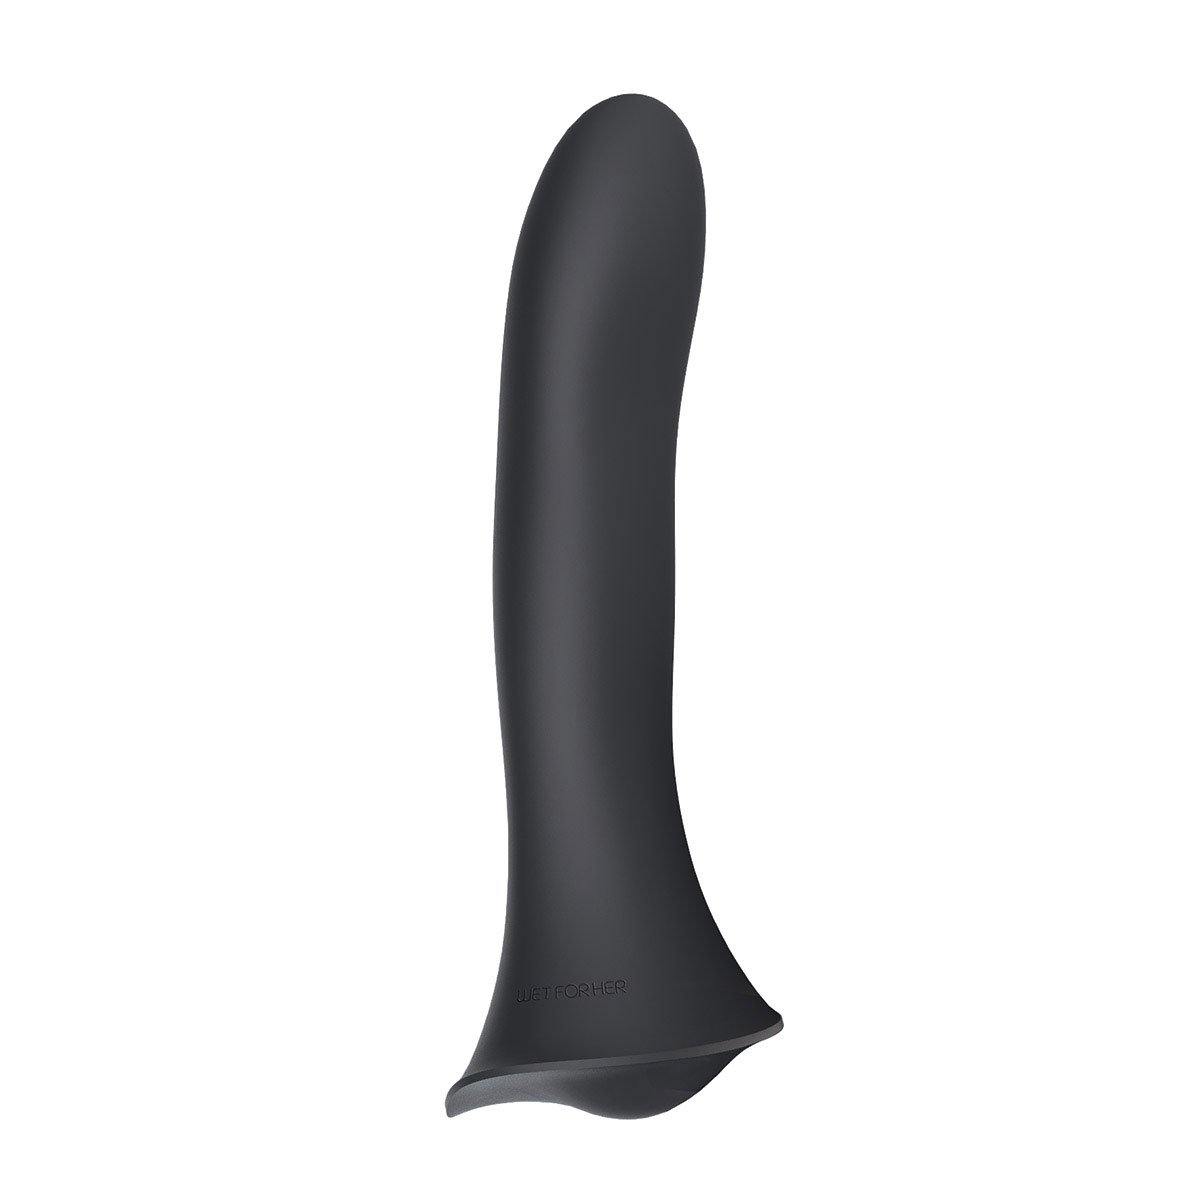 Wet for Her Fusion Dil (M) - Buy At Luxury Toy X - Free 3-Day Shipping